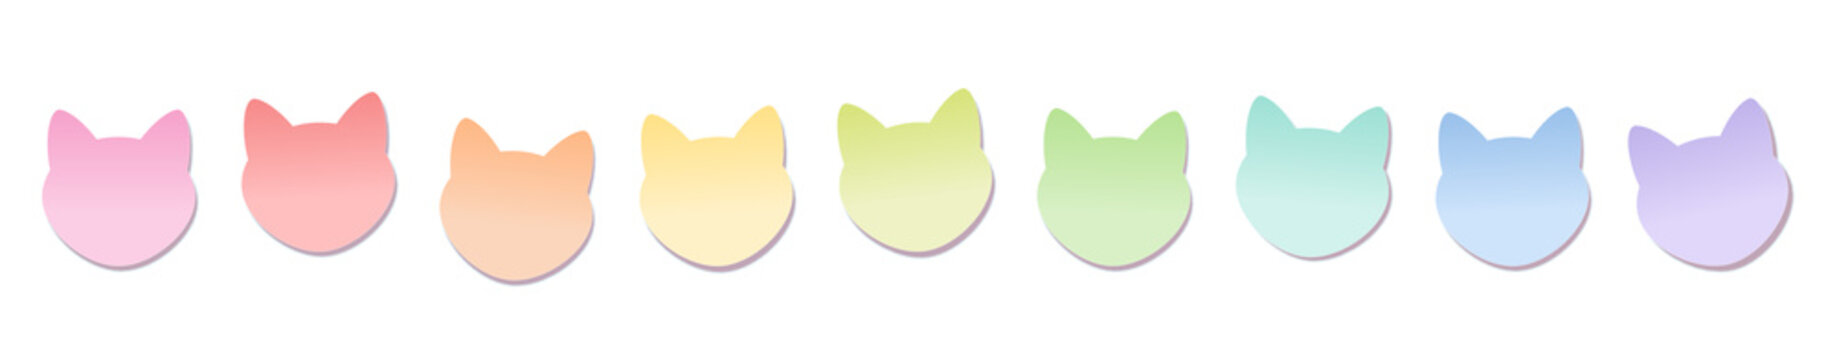 Cats head memos, colored sticky notes, rainbow colored set. Isolated vector illustration on white background.
